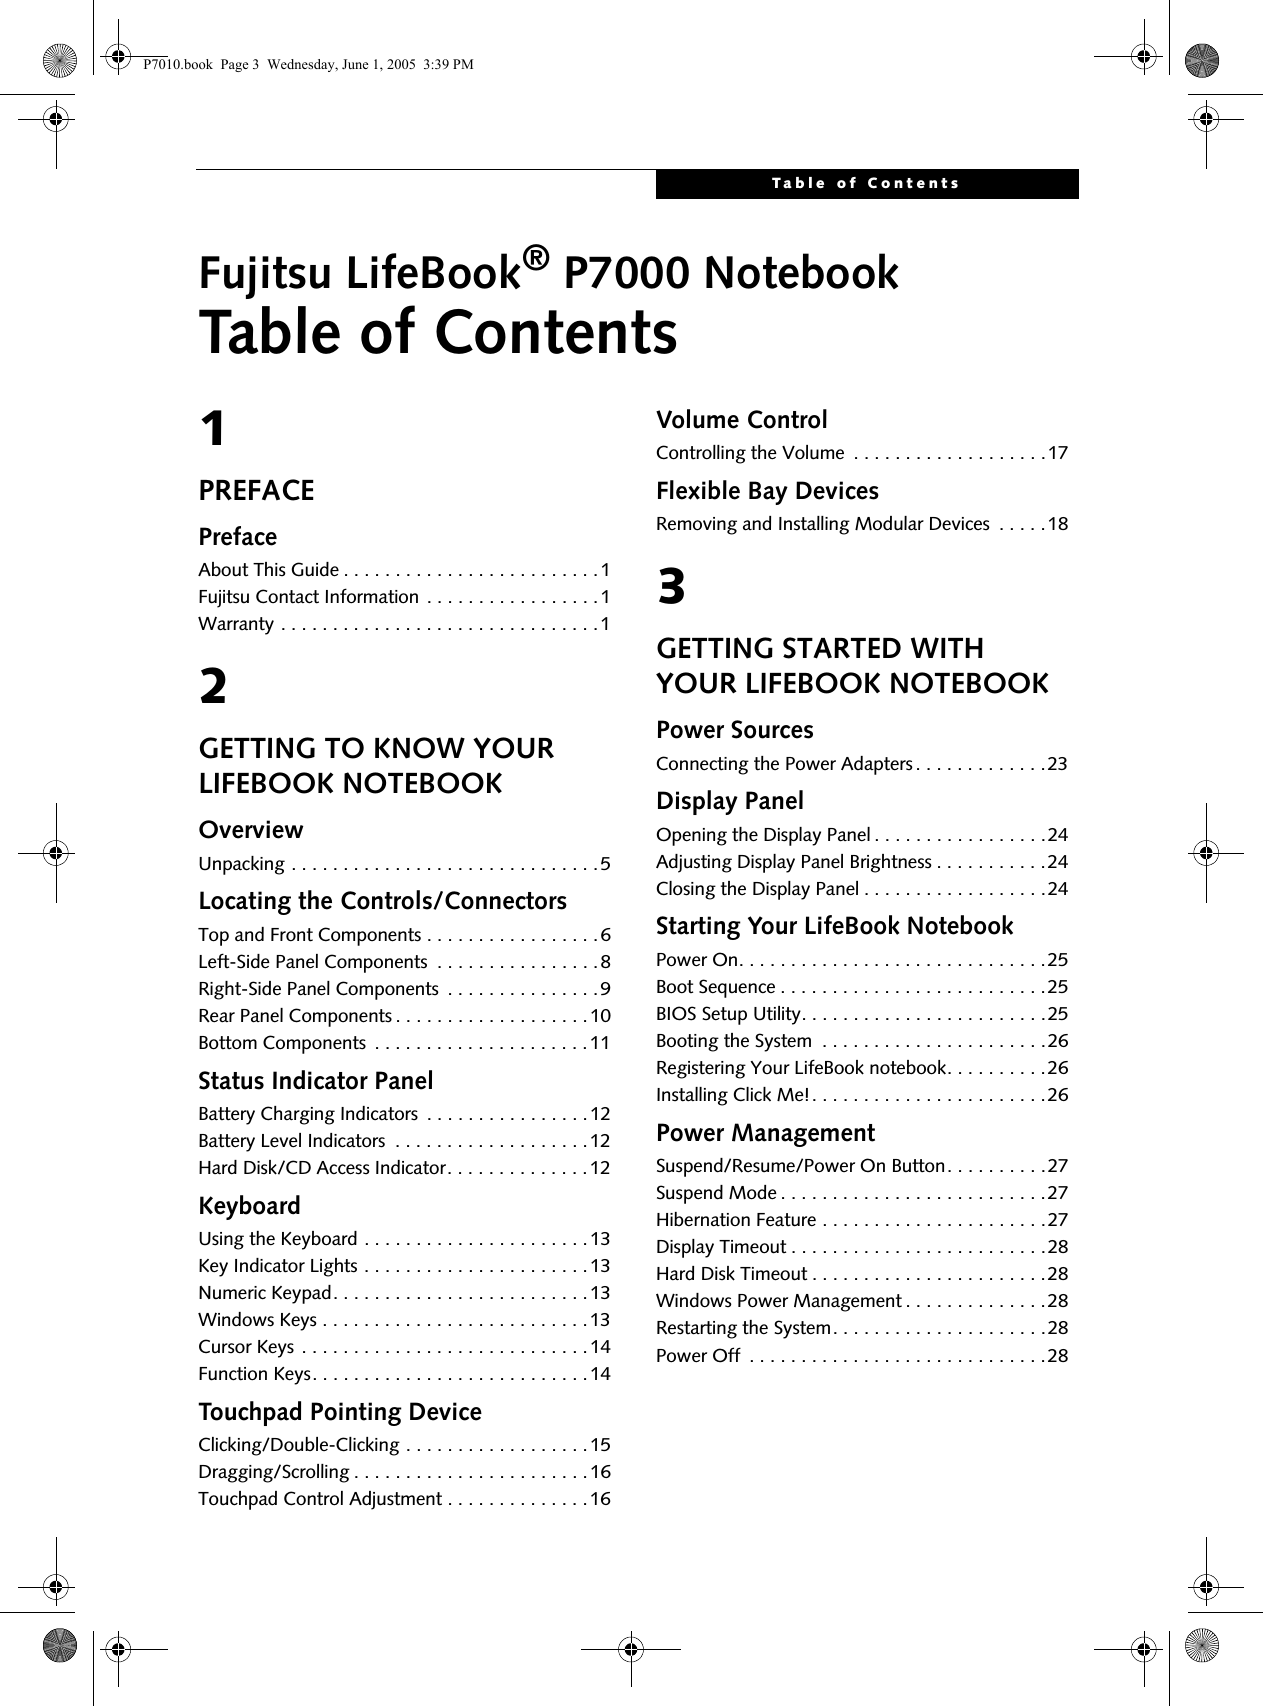 Table of ContentsFujitsu LifeBook® P7000 NotebookTable of Contents1PREFACEPrefaceAbout This Guide . . . . . . . . . . . . . . . . . . . . . . . . .1Fujitsu Contact Information . . . . . . . . . . . . . . . . .1Warranty . . . . . . . . . . . . . . . . . . . . . . . . . . . . . . .12GETTING TO KNOW YOUR LIFEBOOK NOTEBOOKOverviewUnpacking . . . . . . . . . . . . . . . . . . . . . . . . . . . . . .5Locating the Controls/ConnectorsTop and Front Components . . . . . . . . . . . . . . . . .6Left-Side Panel Components  . . . . . . . . . . . . . . . .8Right-Side Panel Components  . . . . . . . . . . . . . . .9Rear Panel Components . . . . . . . . . . . . . . . . . . .10Bottom Components  . . . . . . . . . . . . . . . . . . . . .11Status Indicator PanelBattery Charging Indicators  . . . . . . . . . . . . . . . .12Battery Level Indicators  . . . . . . . . . . . . . . . . . . .12Hard Disk/CD Access Indicator. . . . . . . . . . . . . .12KeyboardUsing the Keyboard . . . . . . . . . . . . . . . . . . . . . .13Key Indicator Lights . . . . . . . . . . . . . . . . . . . . . .13Numeric Keypad. . . . . . . . . . . . . . . . . . . . . . . . .13Windows Keys . . . . . . . . . . . . . . . . . . . . . . . . . .13Cursor Keys . . . . . . . . . . . . . . . . . . . . . . . . . . . .14Function Keys. . . . . . . . . . . . . . . . . . . . . . . . . . .14Touchpad Pointing DeviceClicking/Double-Clicking . . . . . . . . . . . . . . . . . .15Dragging/Scrolling . . . . . . . . . . . . . . . . . . . . . . .16Touchpad Control Adjustment . . . . . . . . . . . . . .16Volume ControlControlling the Volume  . . . . . . . . . . . . . . . . . . .17Flexible Bay DevicesRemoving and Installing Modular Devices  . . . . .183GETTING STARTED WITH YOUR LIFEBOOK NOTEBOOKPower SourcesConnecting the Power Adapters . . . . . . . . . . . . .23Display PanelOpening the Display Panel . . . . . . . . . . . . . . . . .24Adjusting Display Panel Brightness . . . . . . . . . . .24Closing the Display Panel . . . . . . . . . . . . . . . . . .24Starting Your LifeBook NotebookPower On. . . . . . . . . . . . . . . . . . . . . . . . . . . . . .25Boot Sequence . . . . . . . . . . . . . . . . . . . . . . . . . .25BIOS Setup Utility. . . . . . . . . . . . . . . . . . . . . . . .25Booting the System  . . . . . . . . . . . . . . . . . . . . . .26Registering Your LifeBook notebook. . . . . . . . . .26Installing Click Me!. . . . . . . . . . . . . . . . . . . . . . .26Power ManagementSuspend/Resume/Power On Button. . . . . . . . . .27Suspend Mode . . . . . . . . . . . . . . . . . . . . . . . . . .27Hibernation Feature . . . . . . . . . . . . . . . . . . . . . .27Display Timeout . . . . . . . . . . . . . . . . . . . . . . . . .28Hard Disk Timeout . . . . . . . . . . . . . . . . . . . . . . .28Windows Power Management . . . . . . . . . . . . . .28Restarting the System. . . . . . . . . . . . . . . . . . . . .28Power Off  . . . . . . . . . . . . . . . . . . . . . . . . . . . . .28P7010.book  Page 3  Wednesday, June 1, 2005  3:39 PM